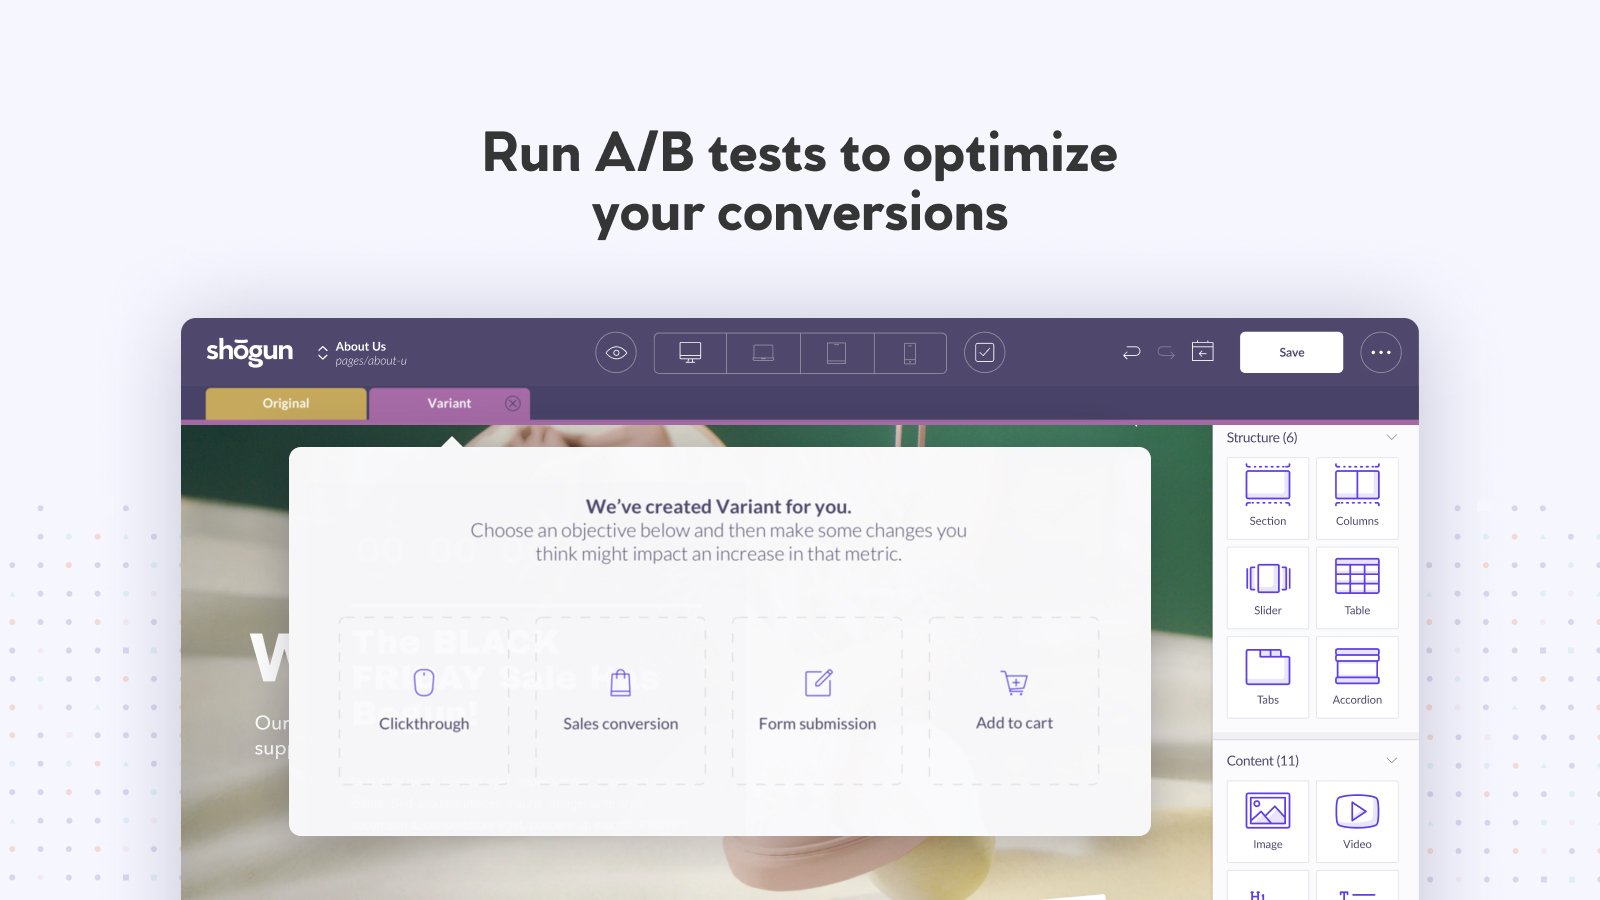 Run AB tests + countdowns to optimize your page conversion rate.